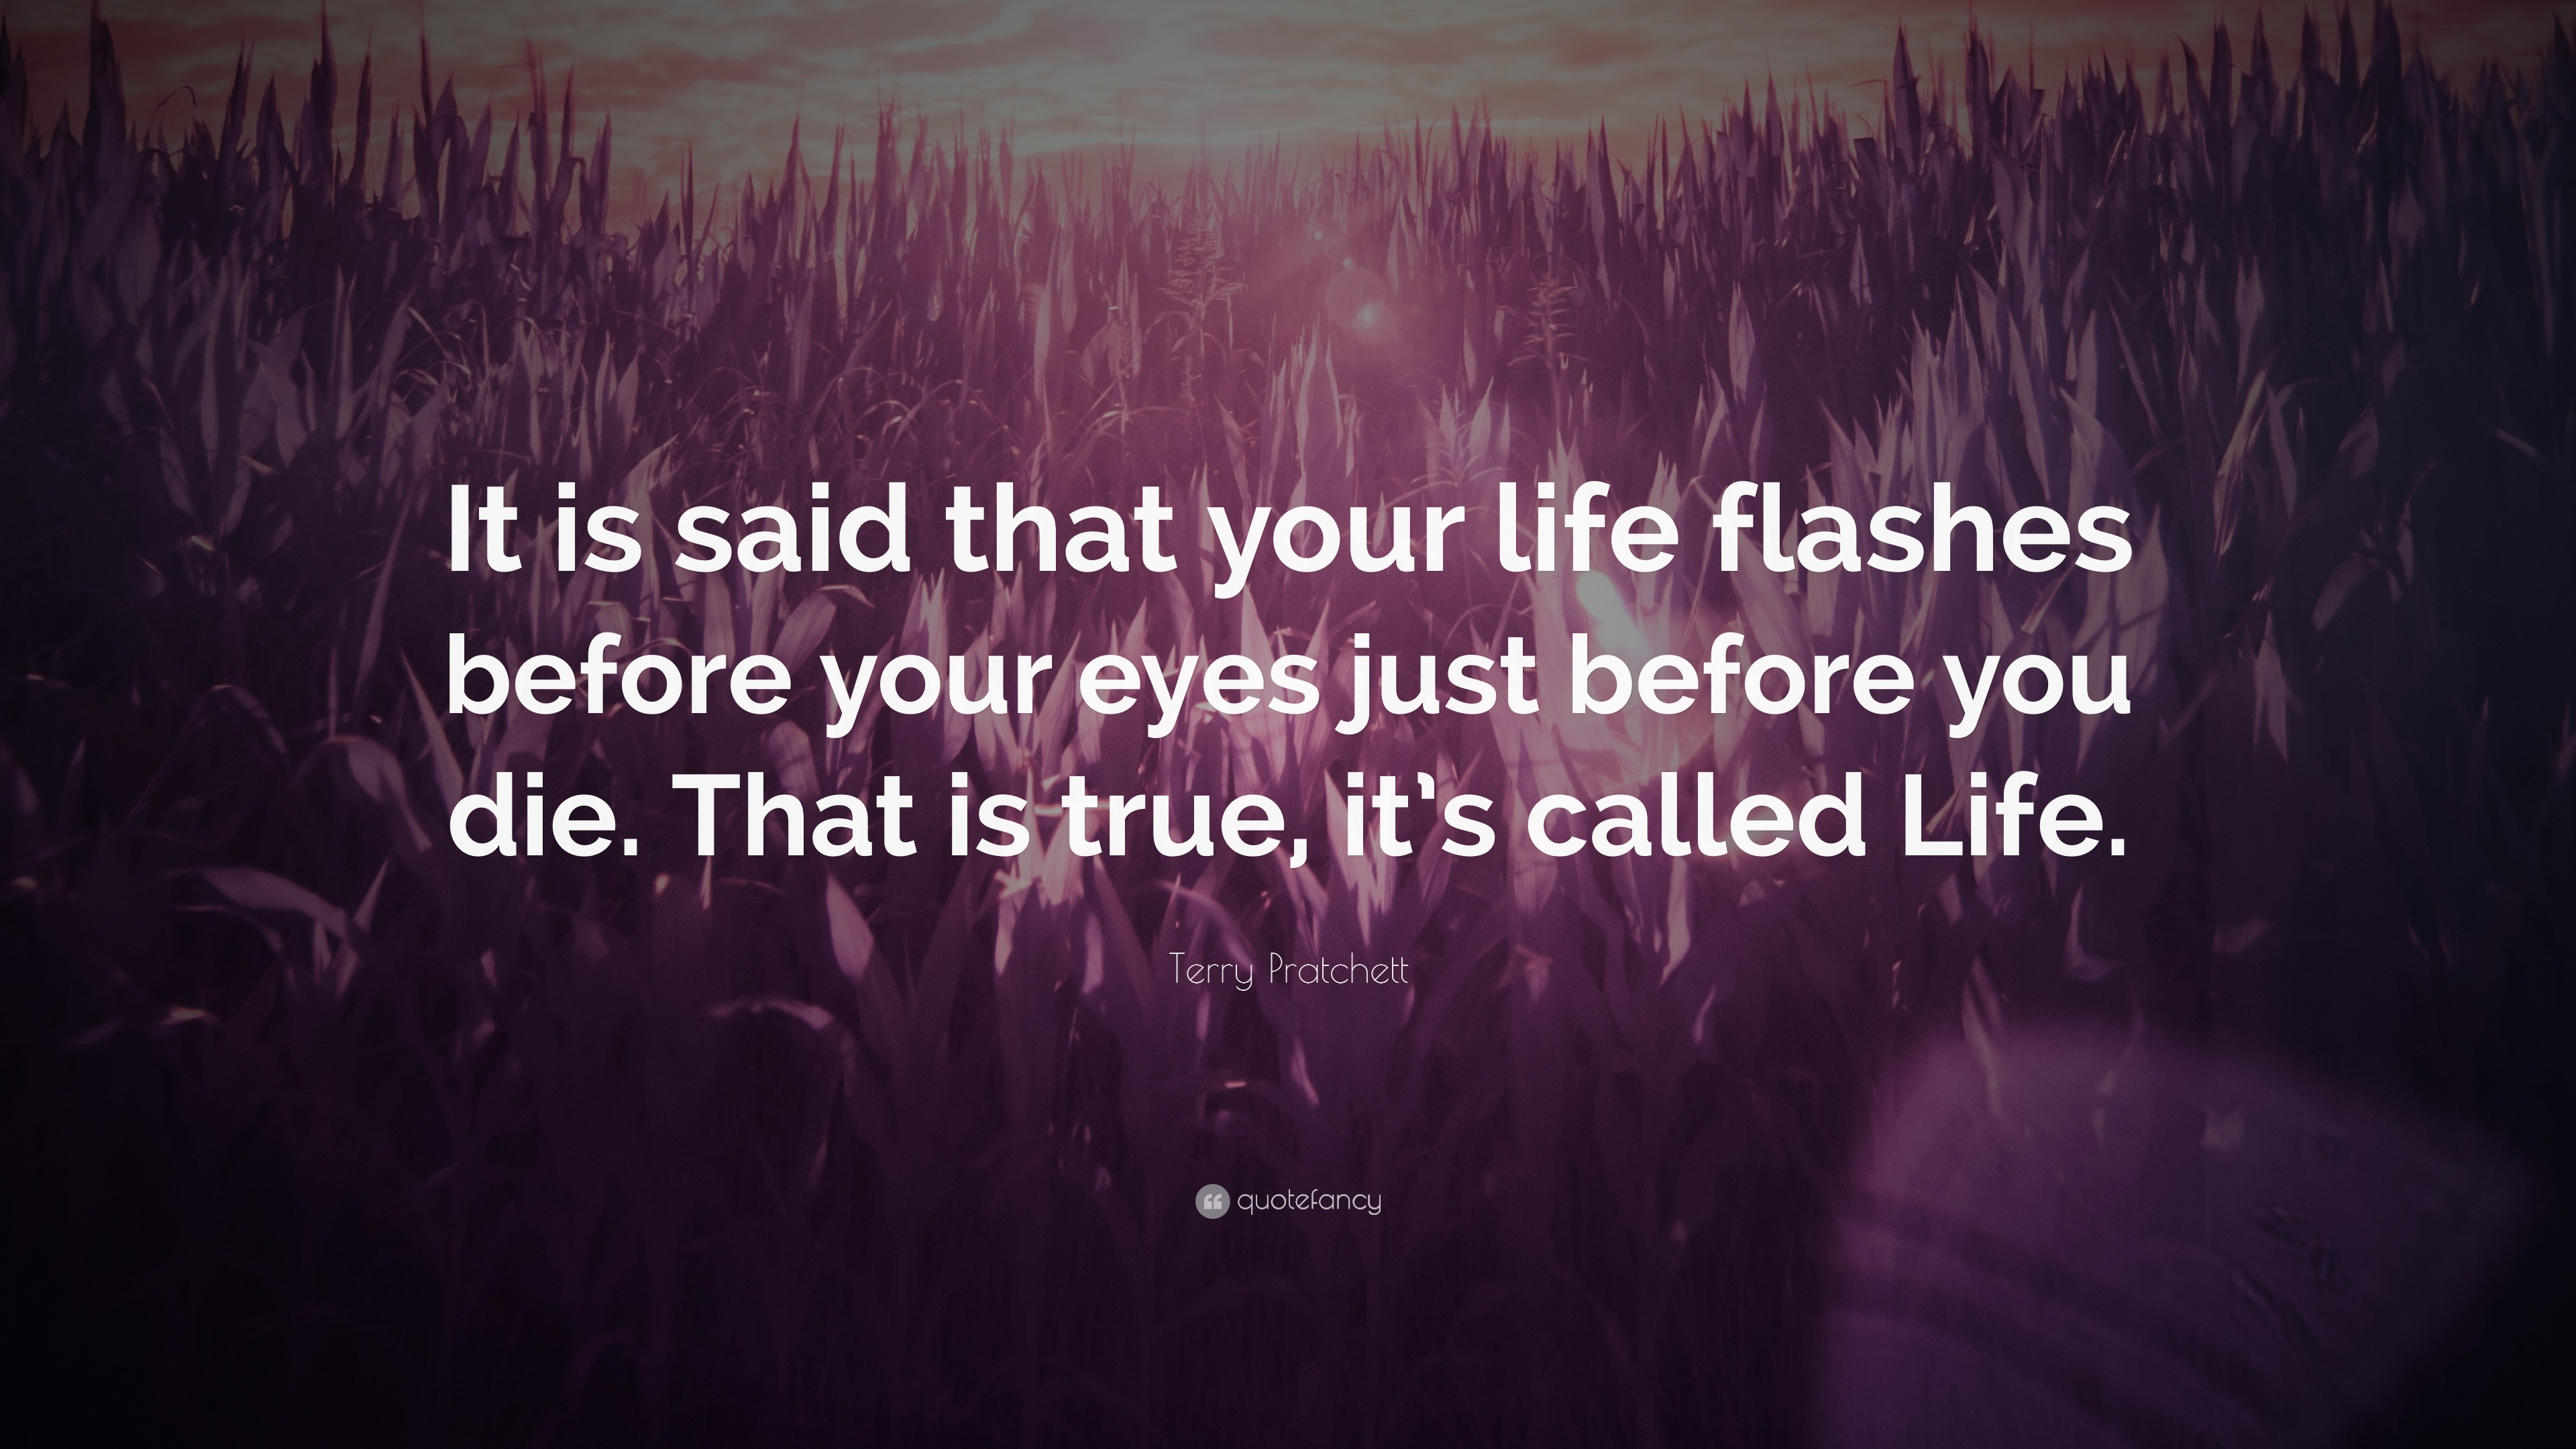 seeing life flash before your eyes